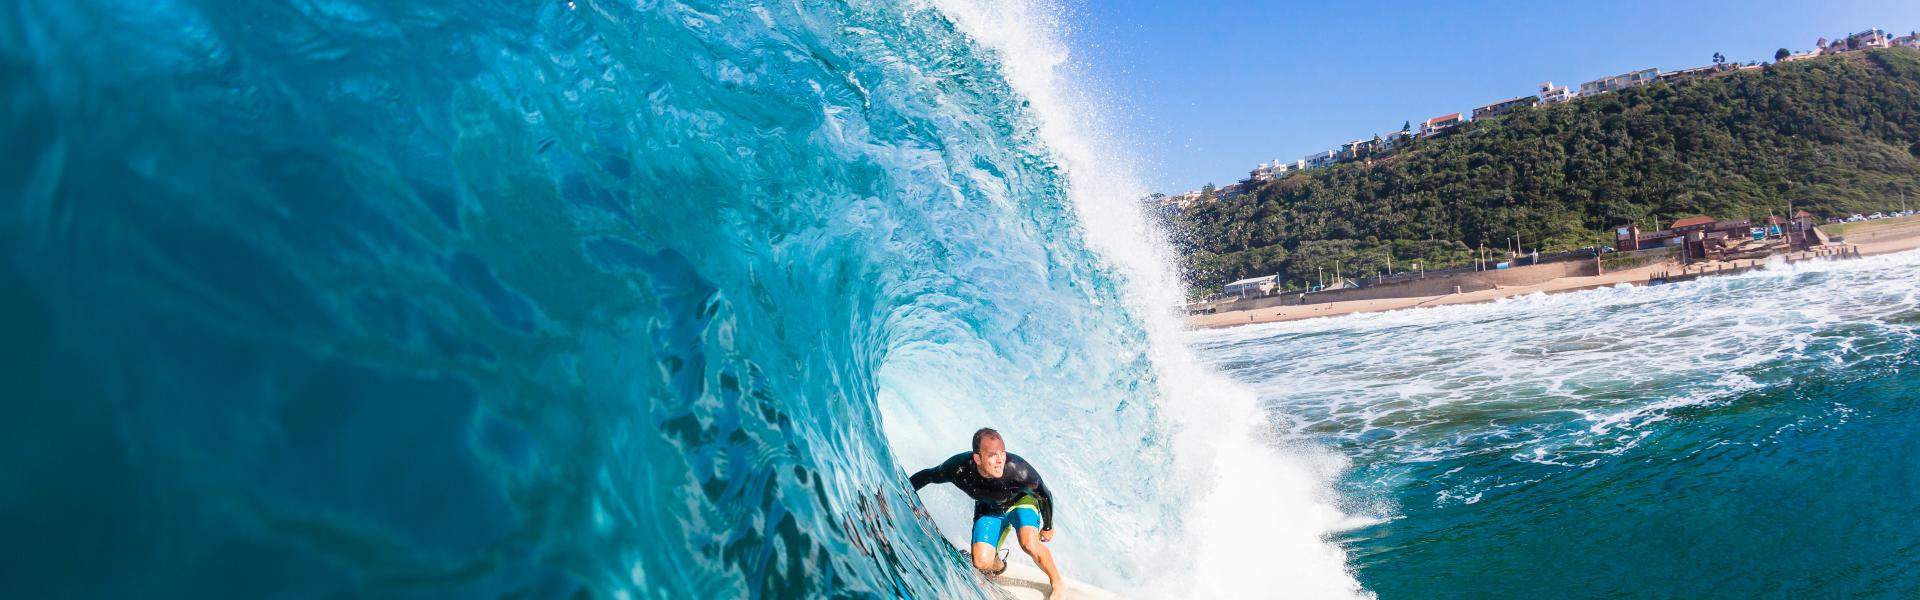 Surfing Vacations in Indonesia - HomeToGo